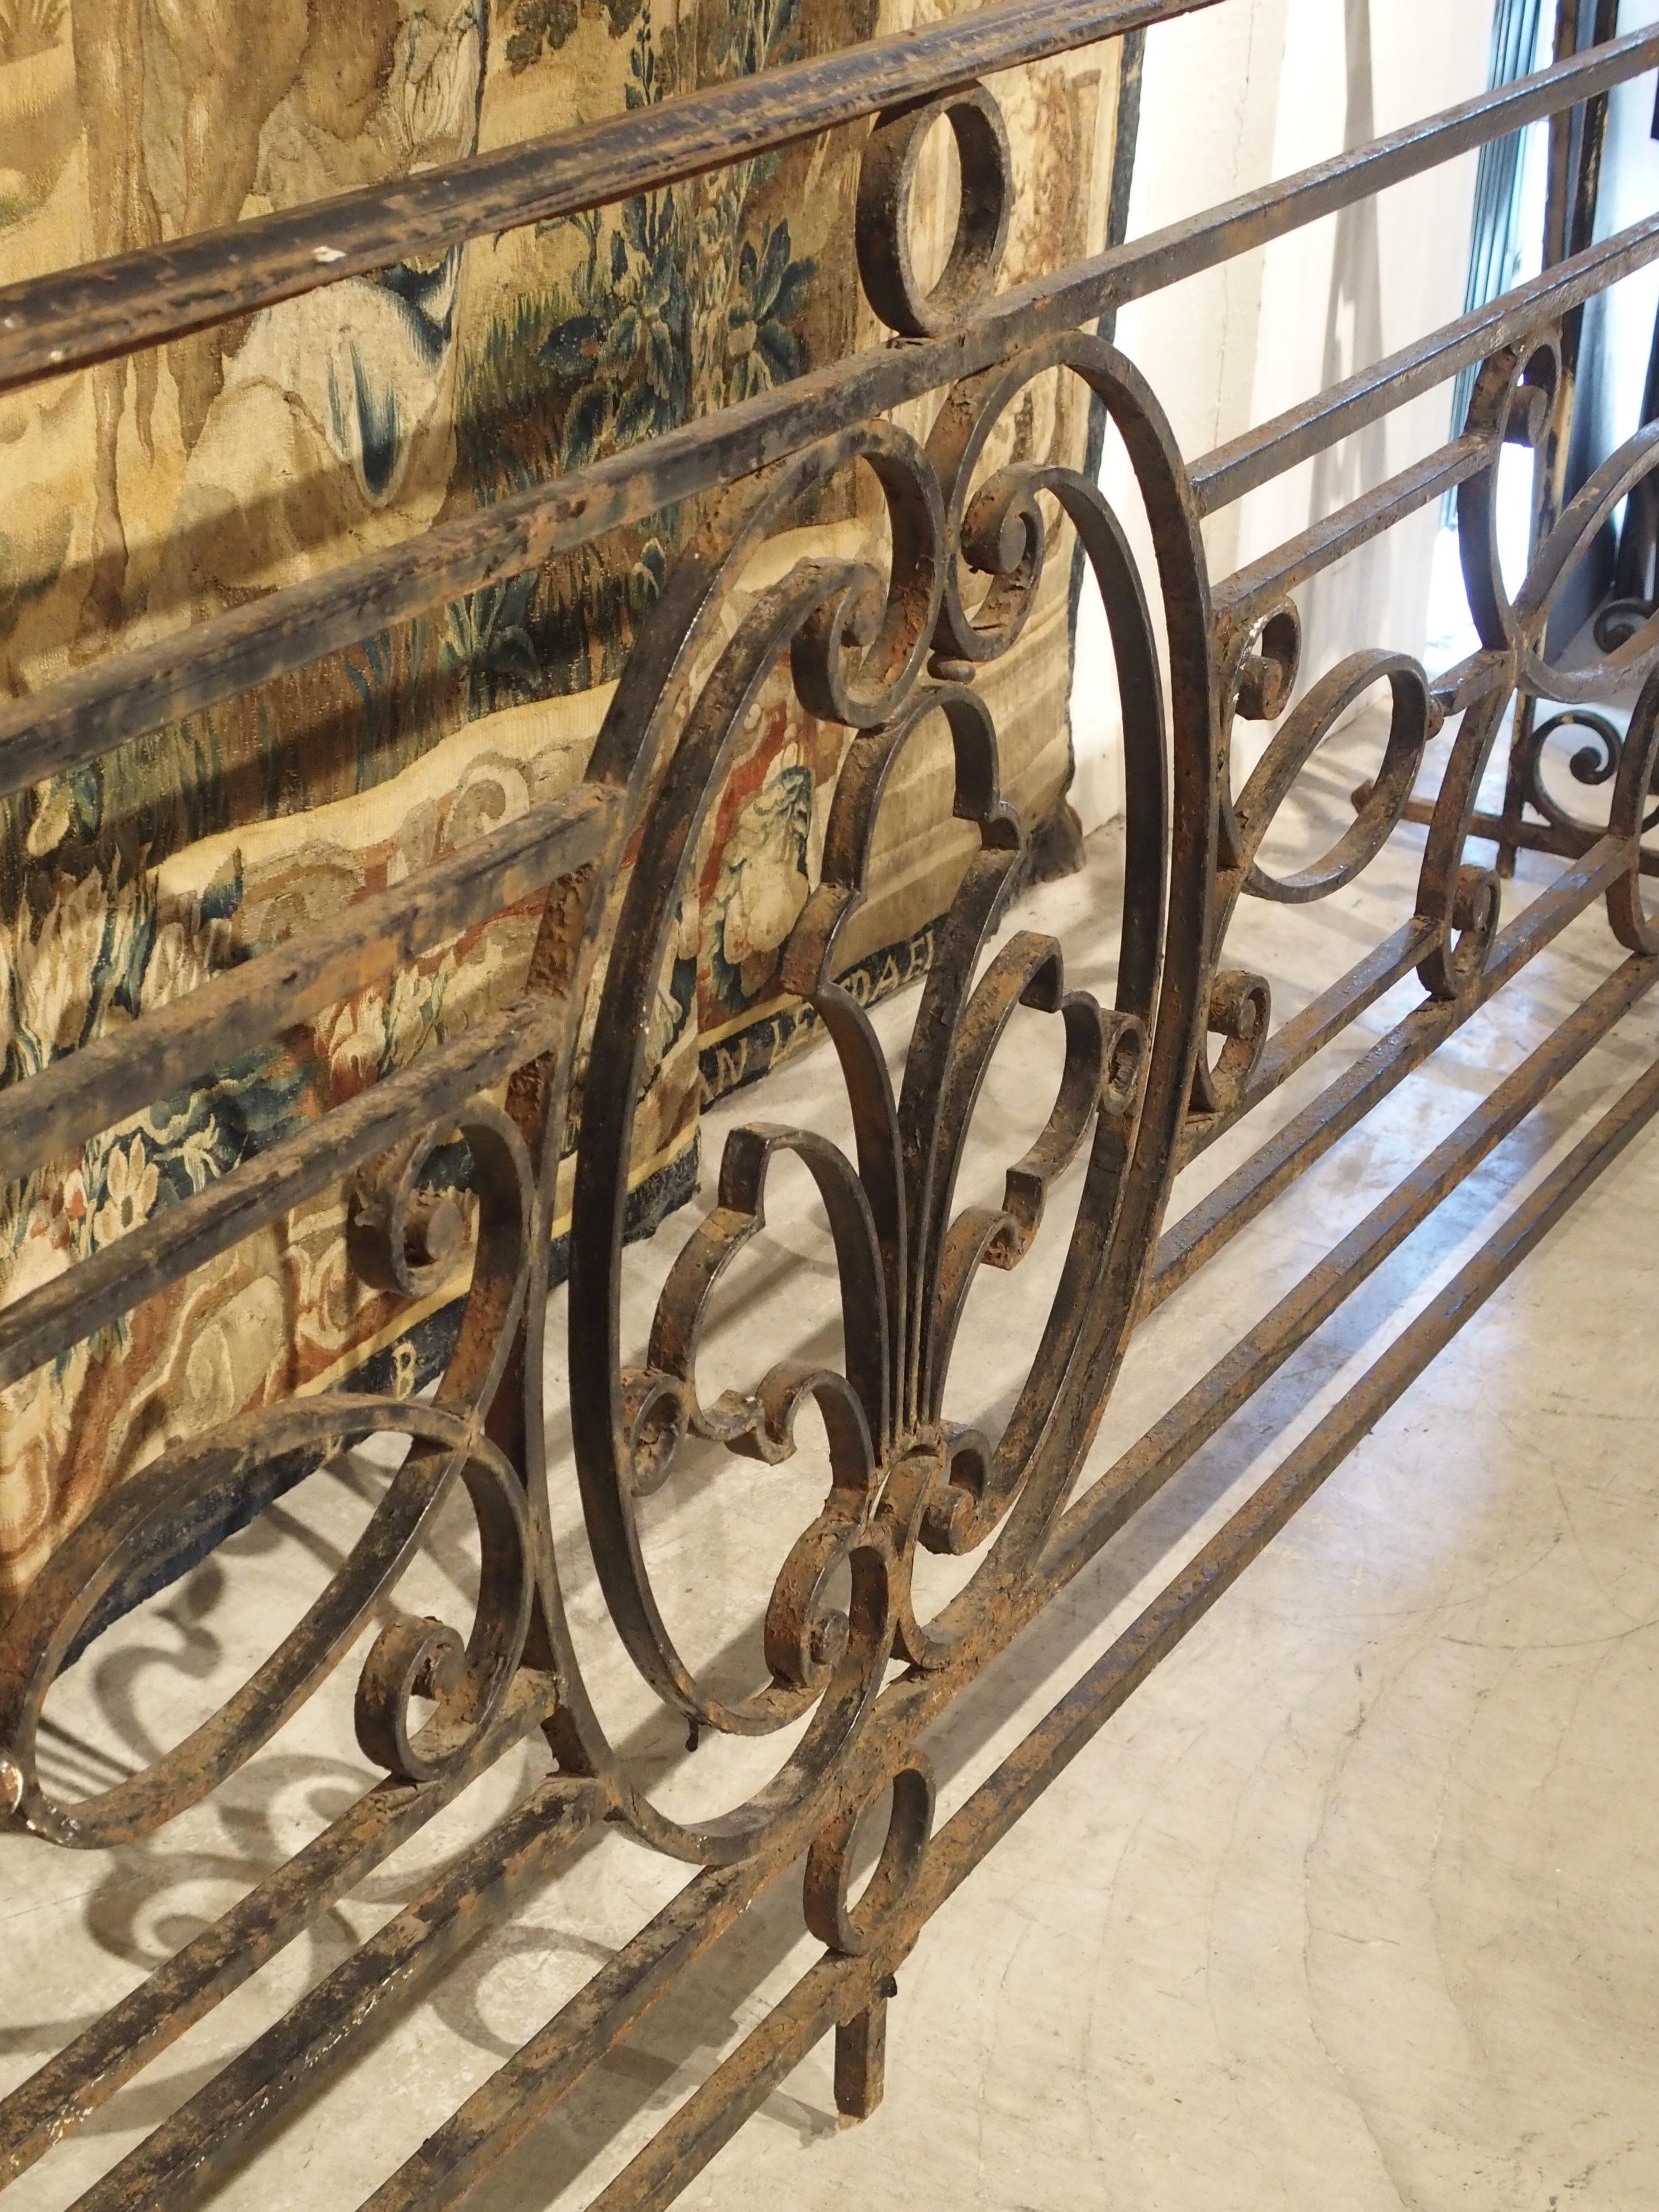 At almost 12 feet long, this long wrought iron balcony gate comes from Argentina during the Belle Époque period. The Belle Époque is generally considered to have begun in 1880 and lasted until 1914. The period is said to begin with the dethroning of